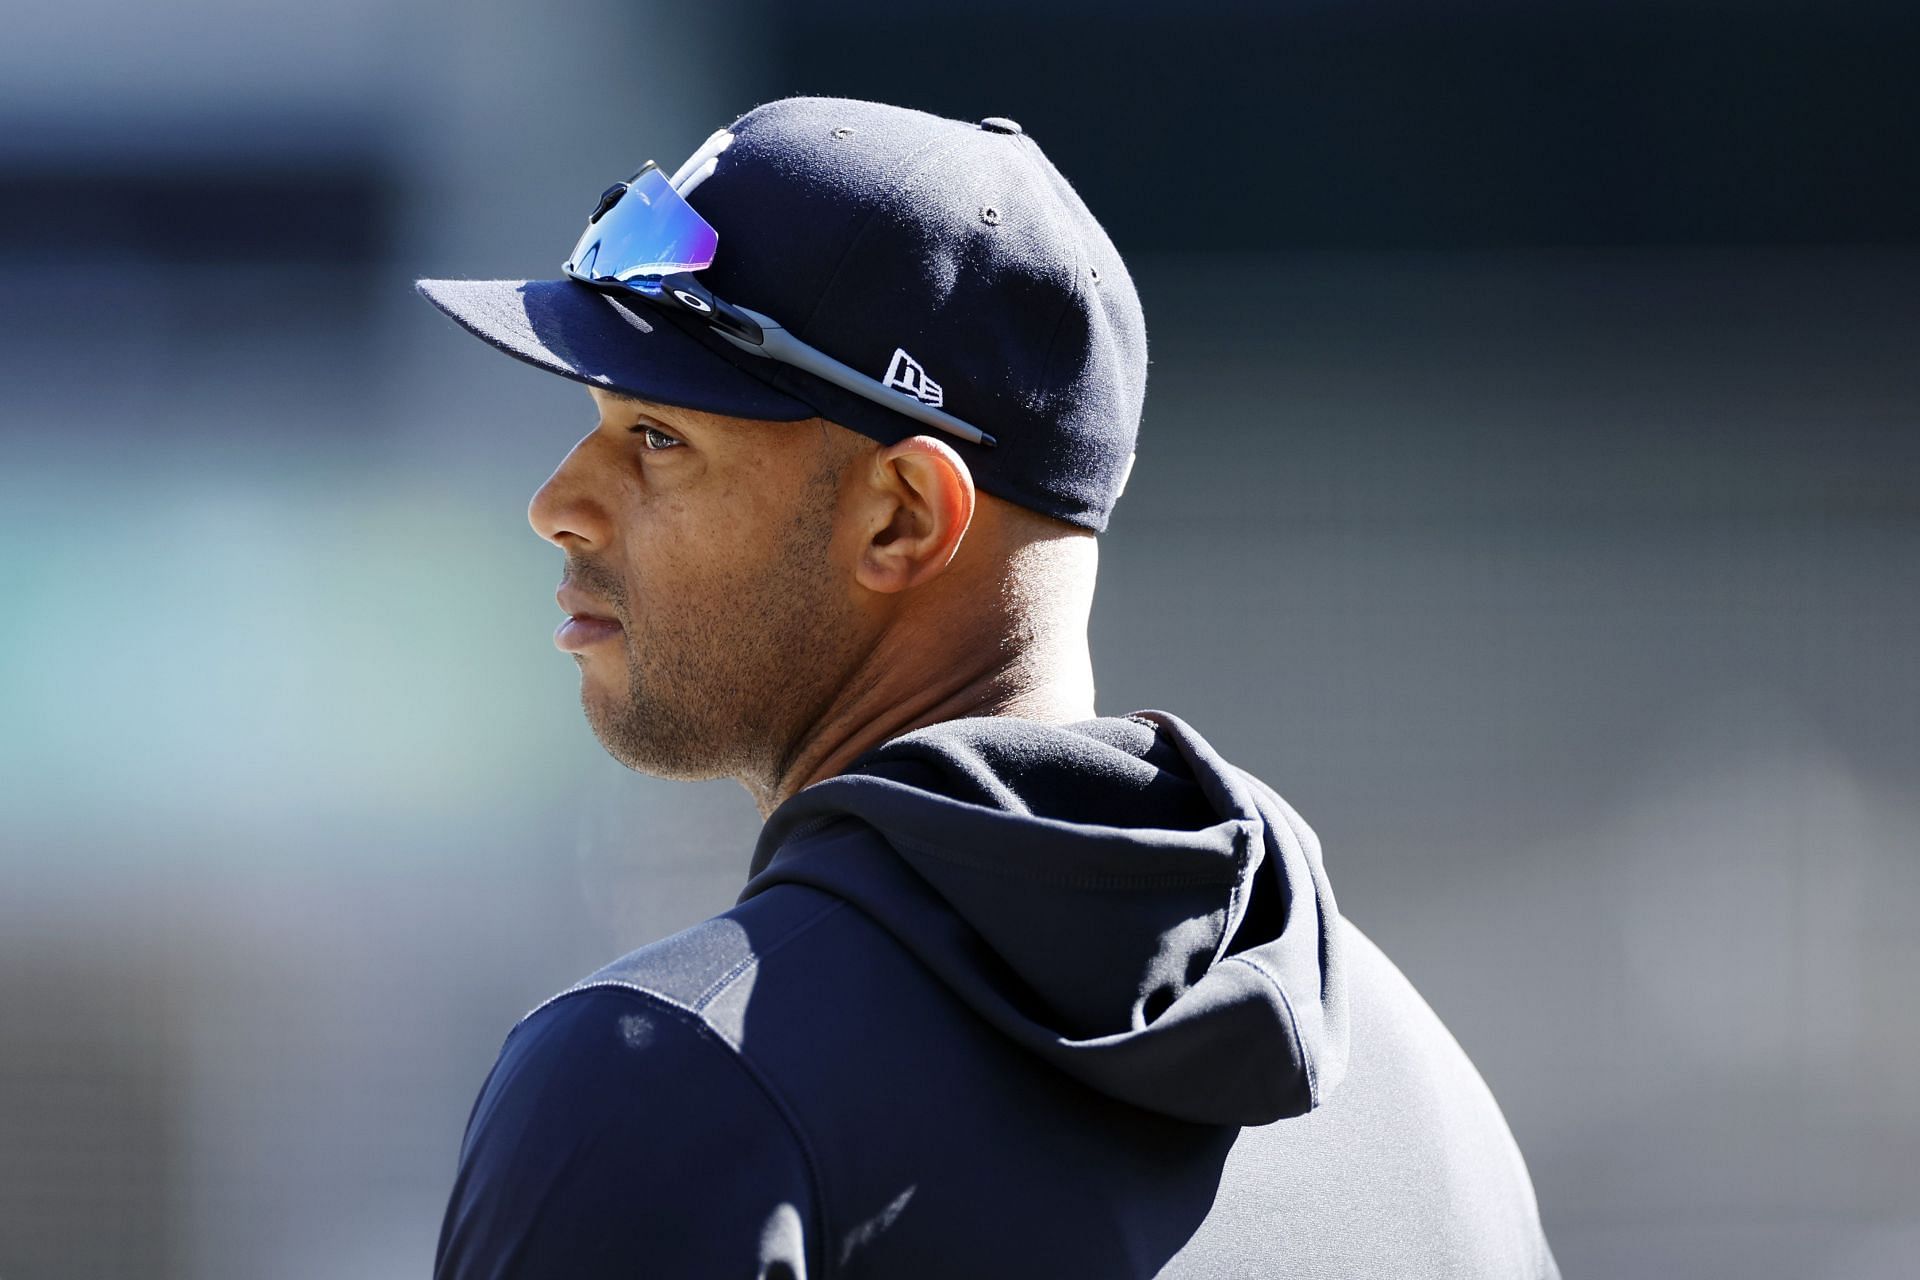 Where could Aaron Hicks end up?